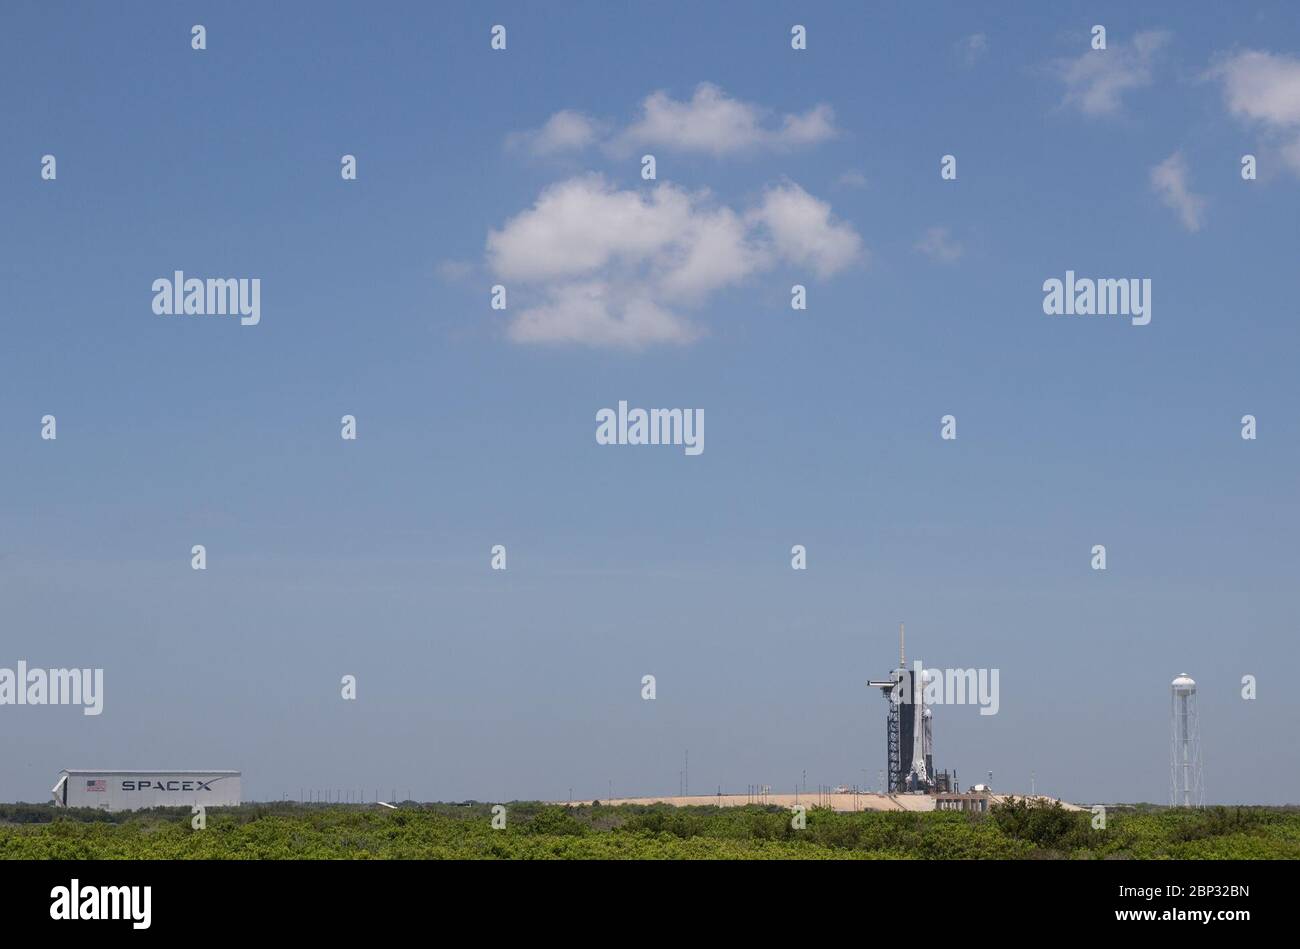 SpaceX Falcon Heavy DoD STP-2 Launch  A SpaceX Falcon Heavy rocket carrying 24 satellites as part of the Department of Defense's Space Test Program-2 (STP-2) mission is seen at Launch Complex 39A, Monday, June 24, 2019 at NASA's Kennedy Space Center in Florida. Four NASA technology and science payloads which will study non-toxic spacecraft fuel, deep space navigation, &quot;bubbles&quot; in the electrically-charged layers of Earth's upper atmosphere, and radiation protection for satellites are among the two dozen satellites that will be launched. The three hour launch window opens at 11:30pm E Stock Photo